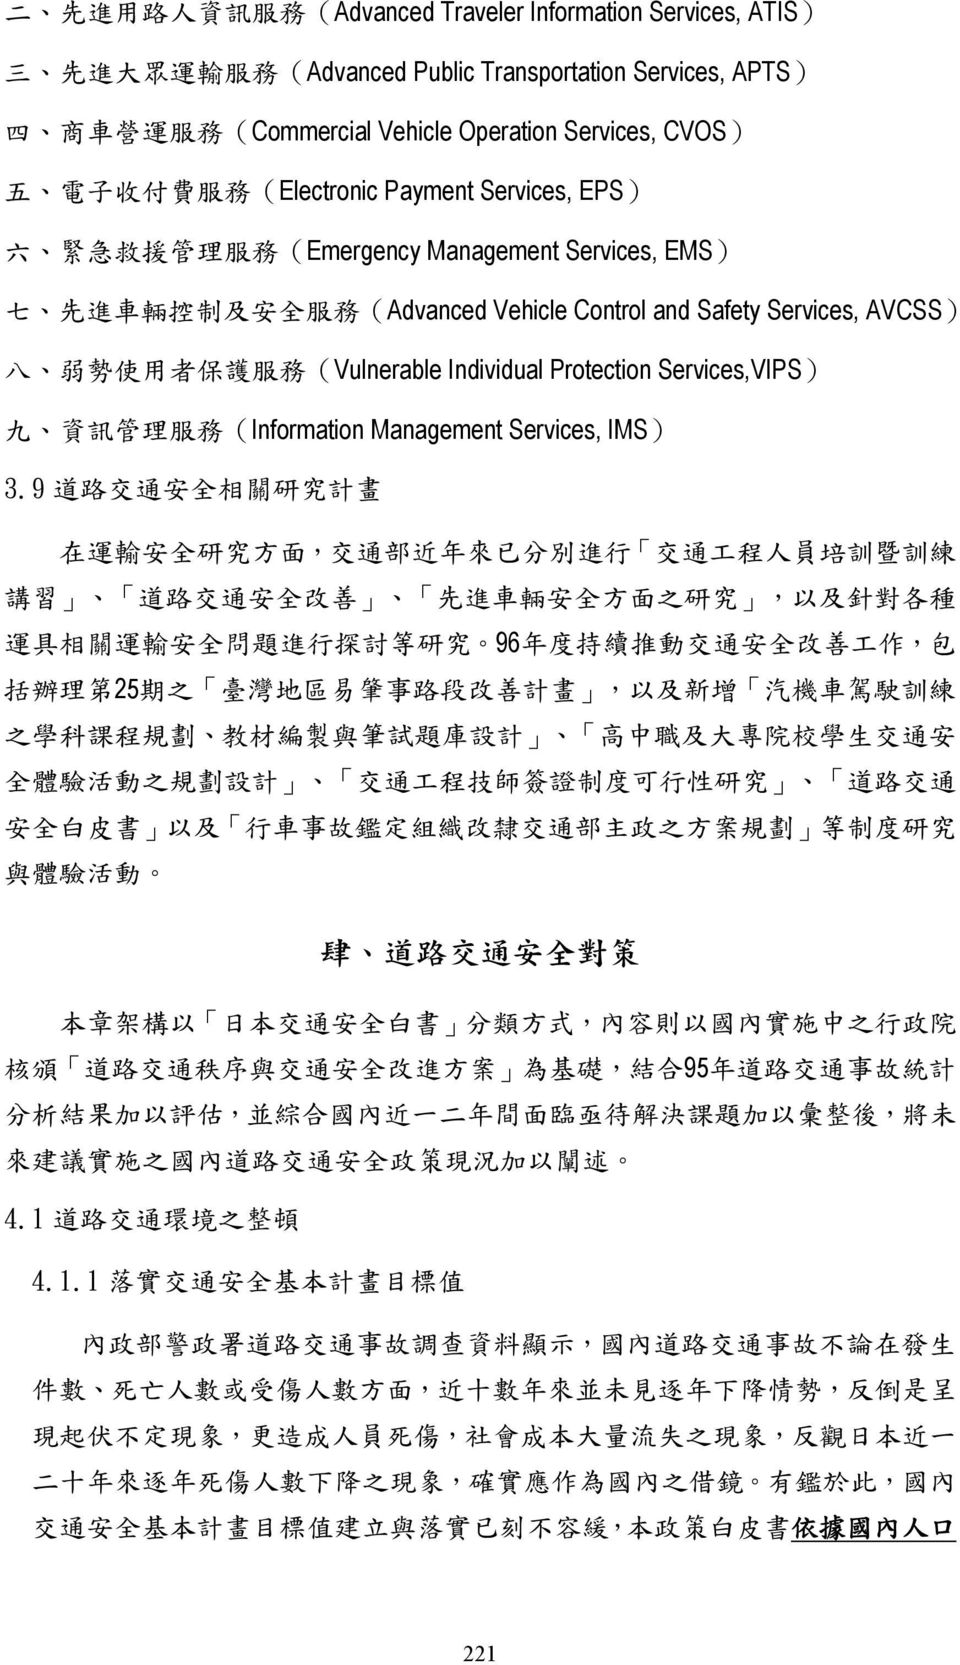 (Vulnerable Individual Protection Services,VIPS) 九 資 訊 管 理 服 務 (Information Management Services, IMS) 3.